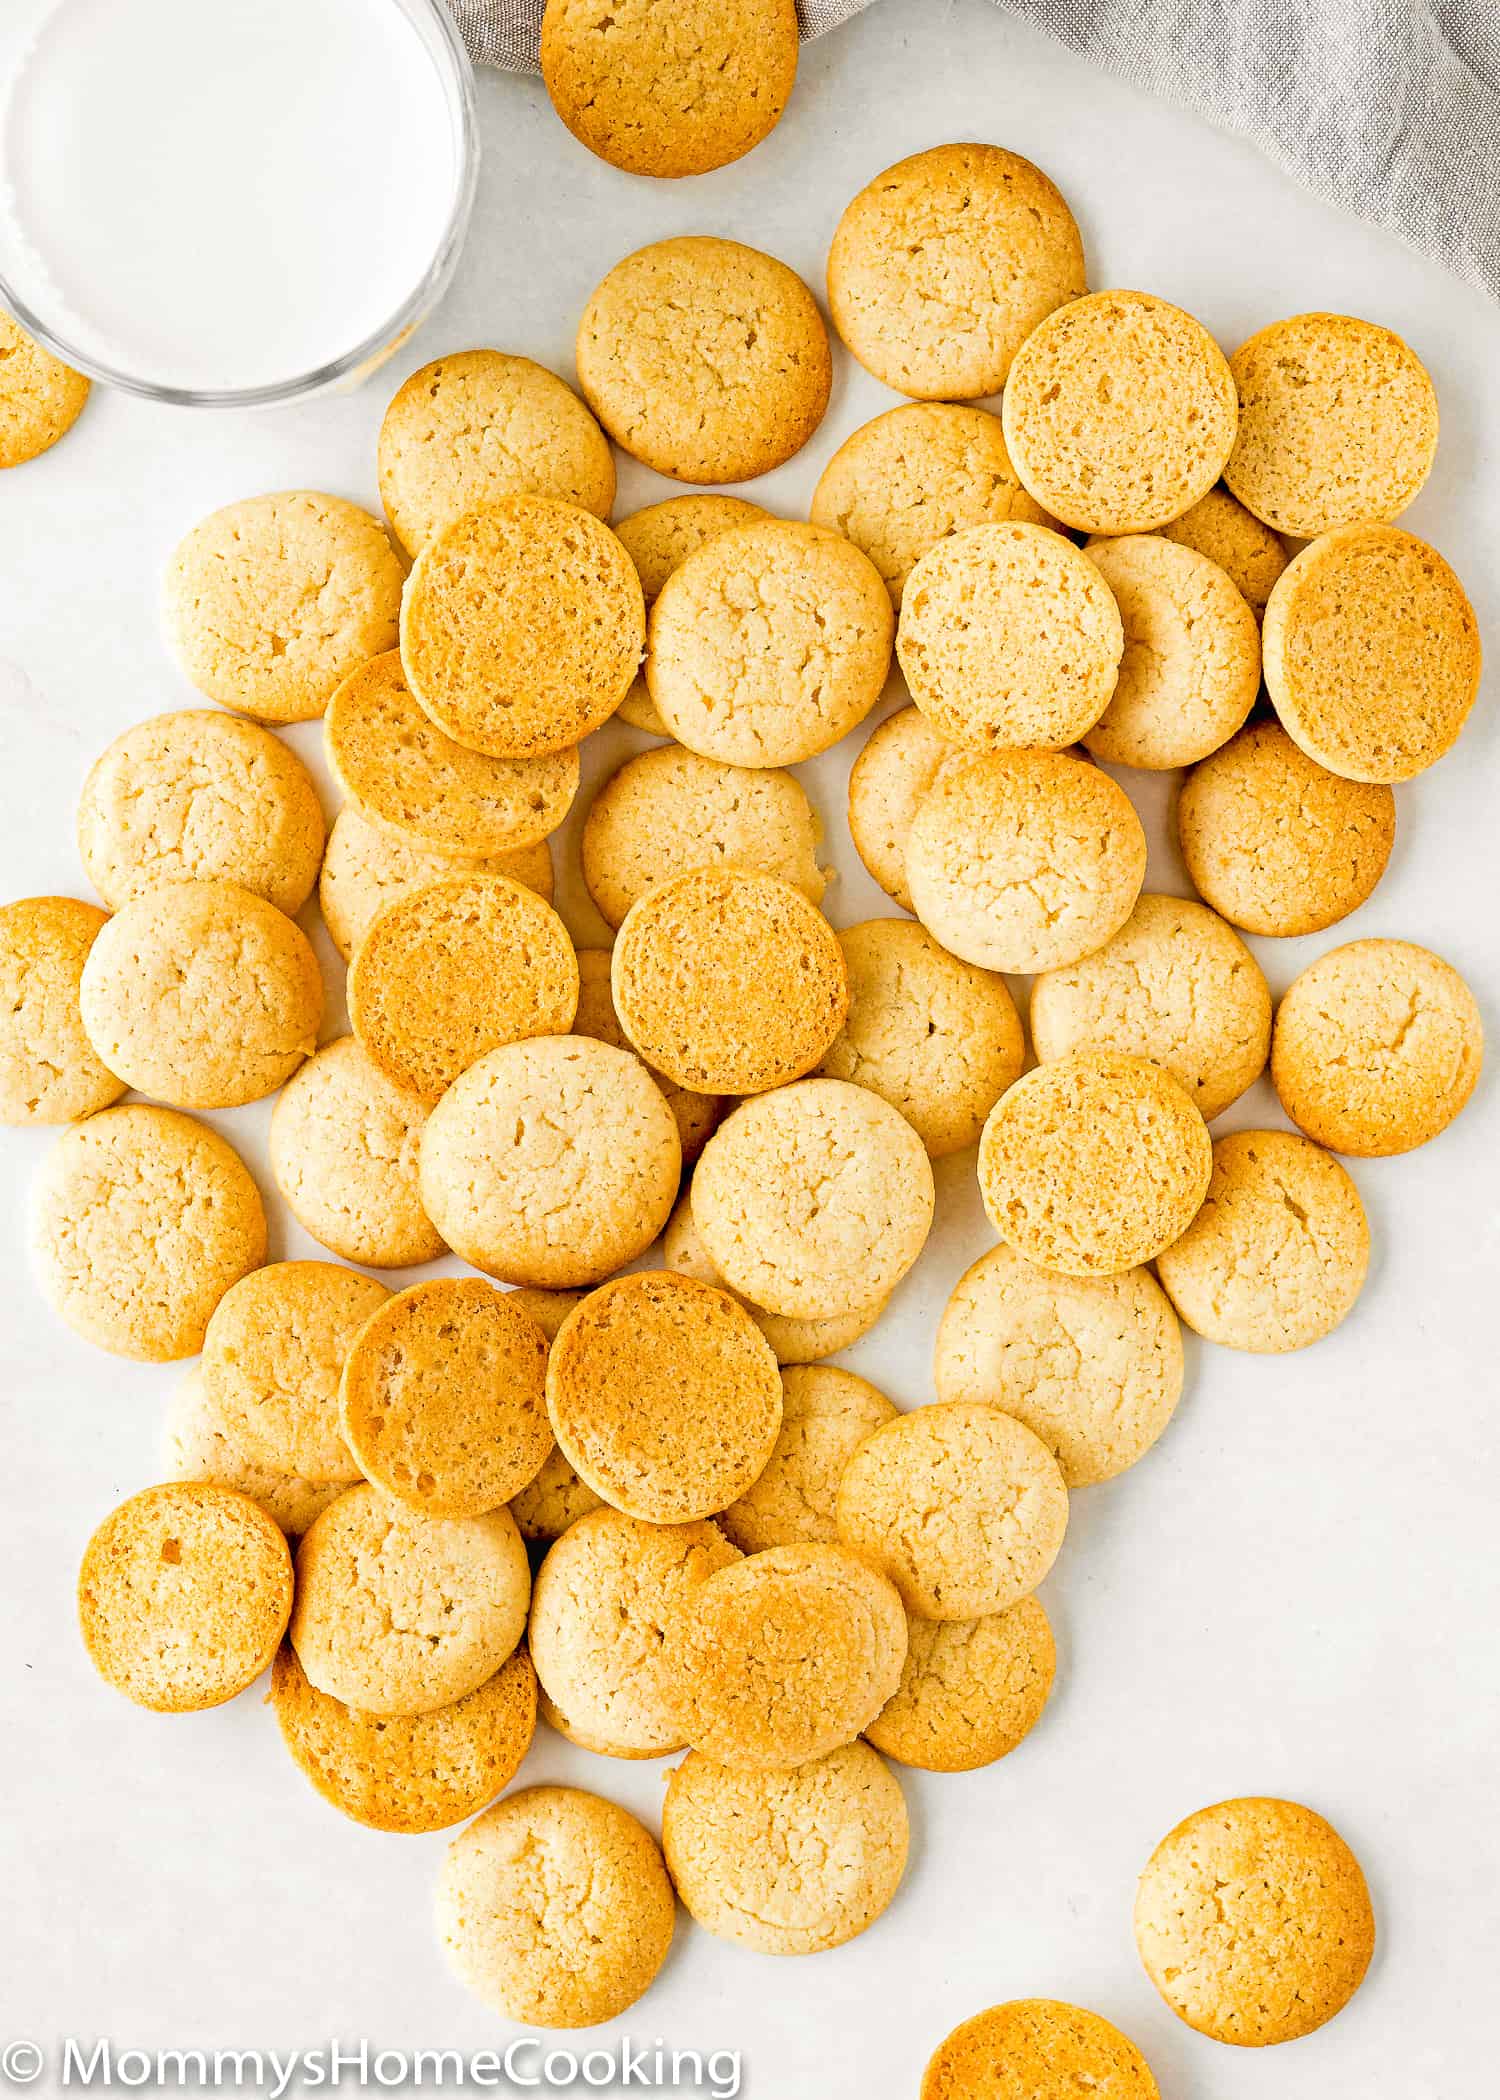 Eggless Vanilla Wafers (Nila Wafers) over a white surface with a glass of milk on the side and a gray kitchen towel.